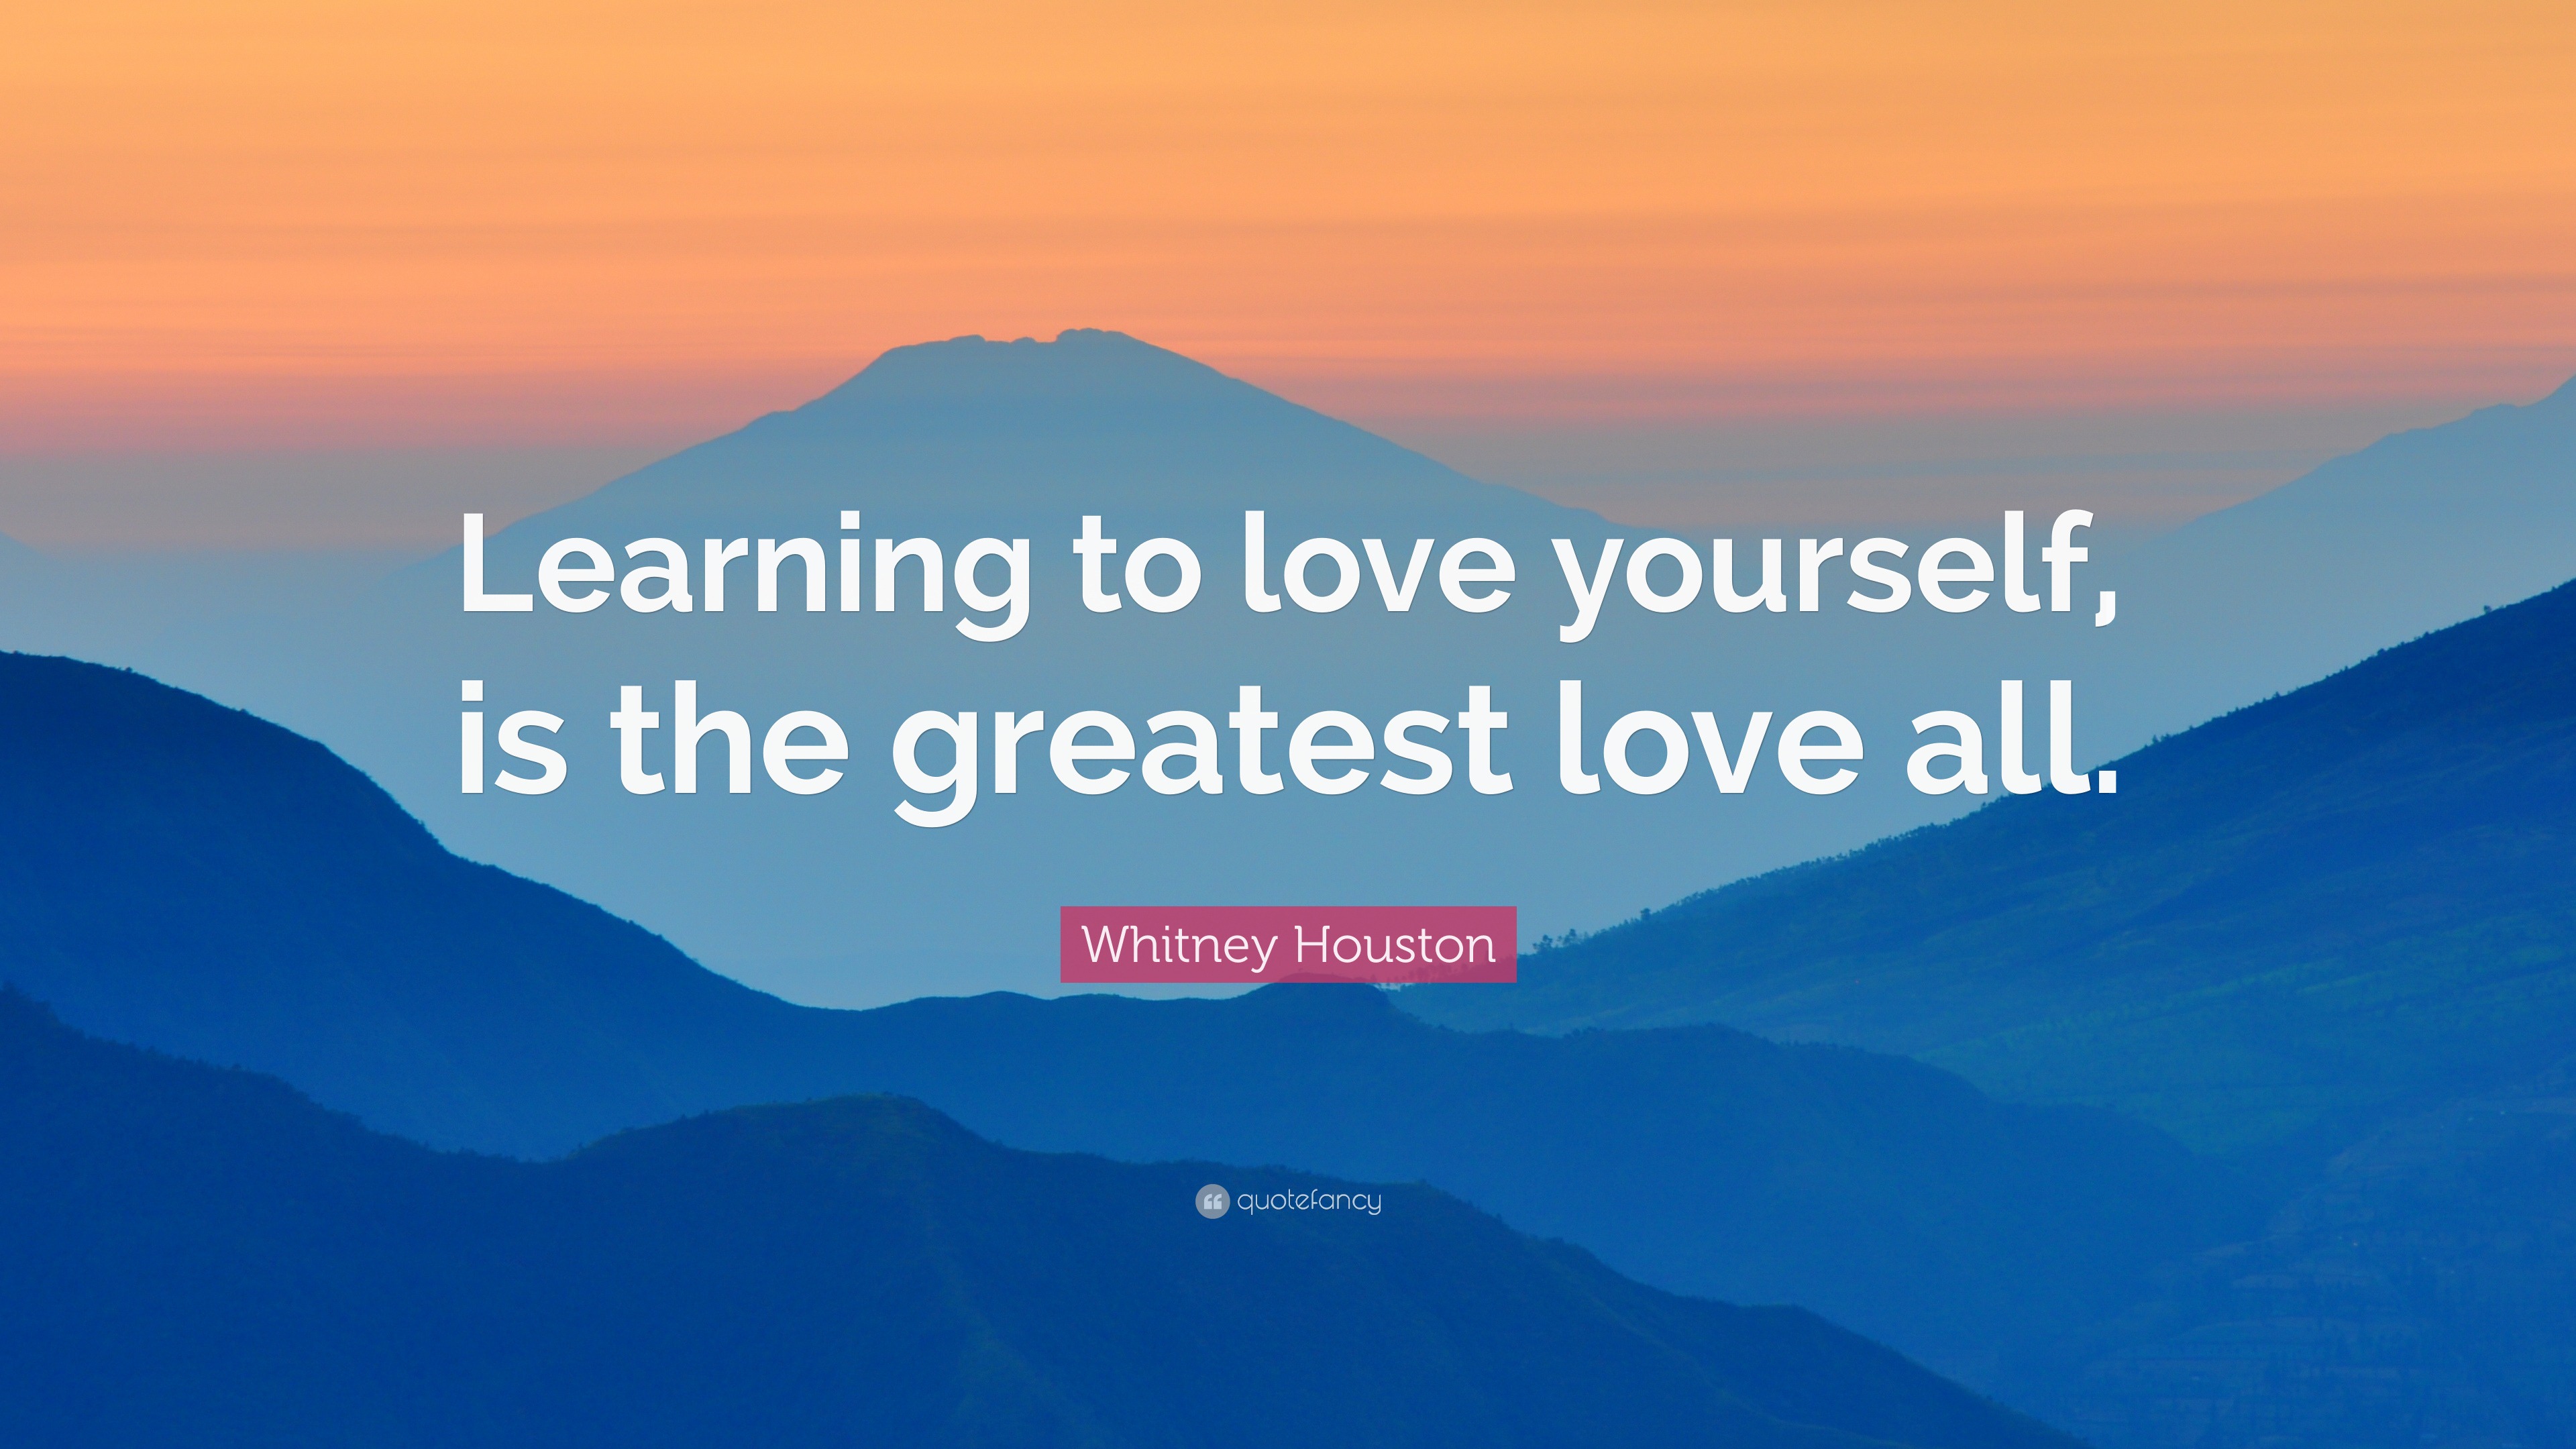 Whitney Houston Quote “Learning to love yourself, is the